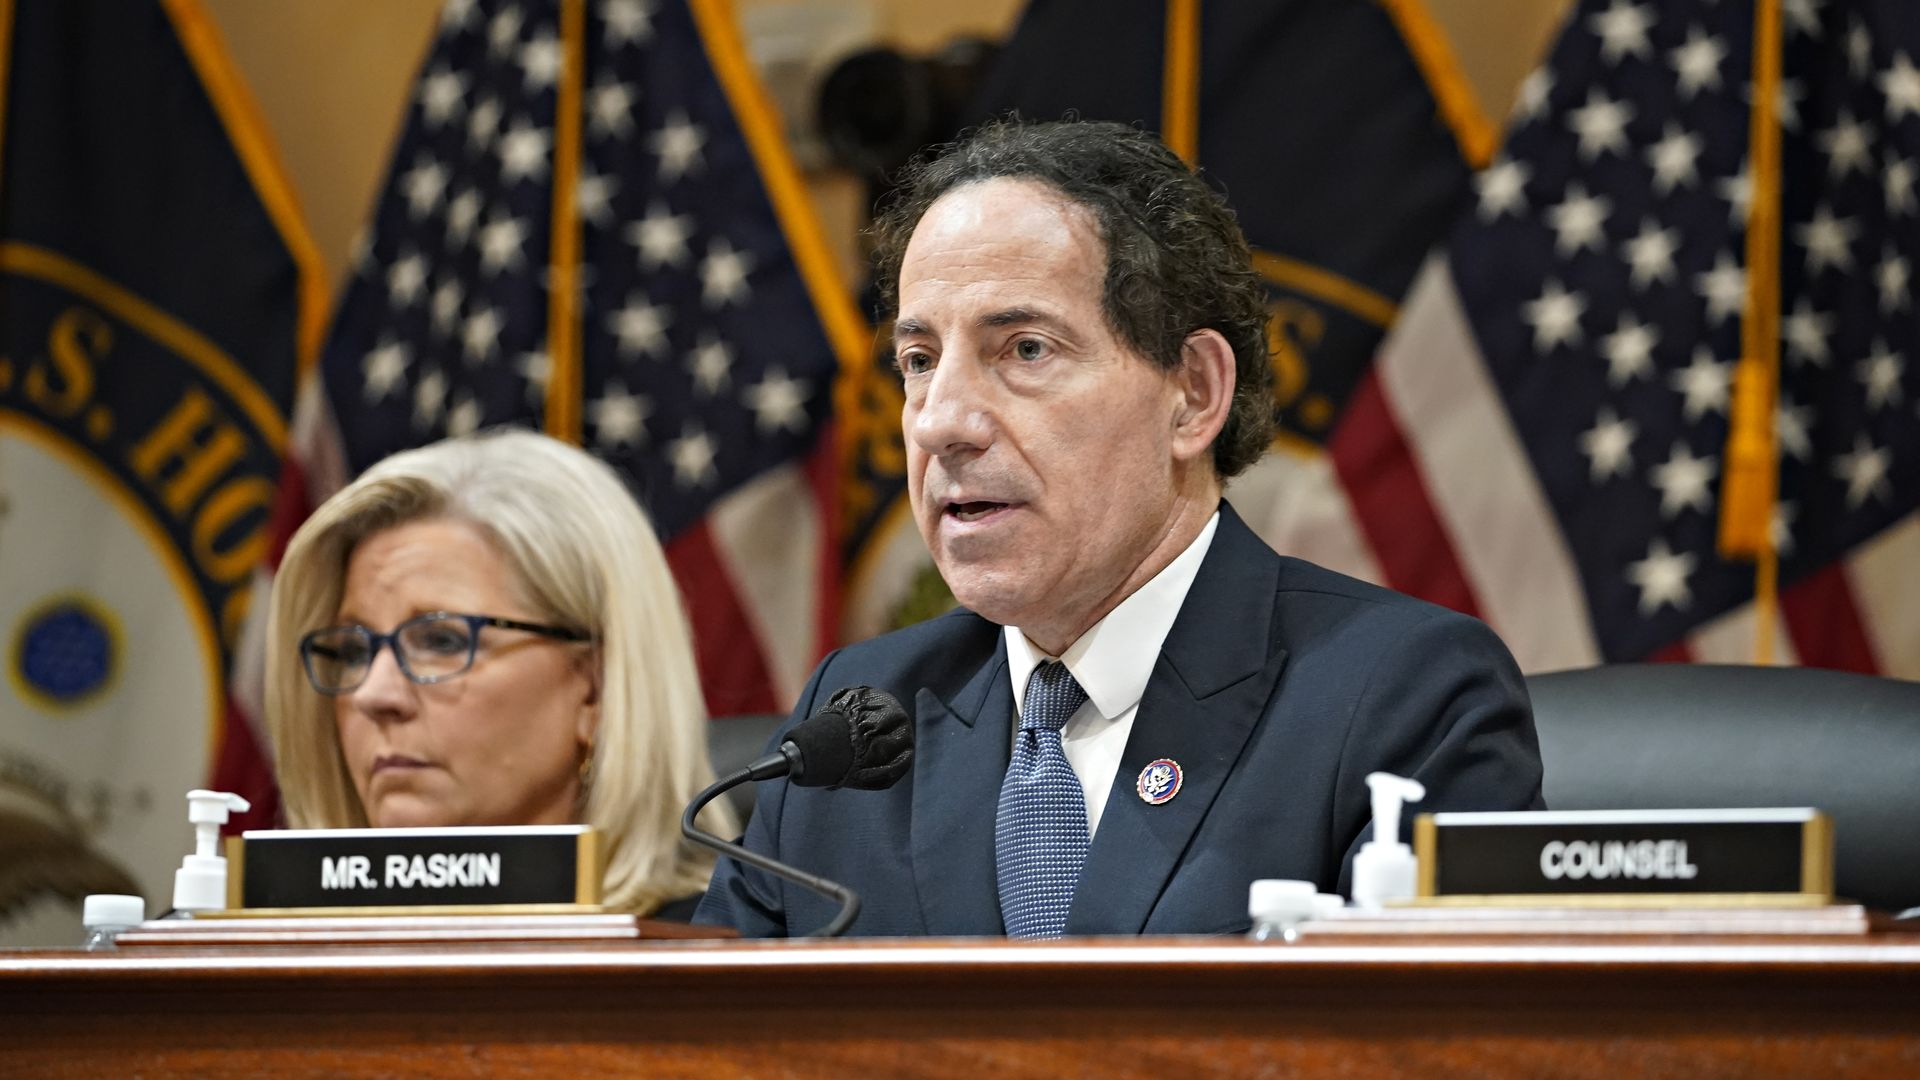 Rep. Jamie Raskin speaks during a hearing of the Select Committee to Investigate the January 6th Attack on the US Capitol in Washington, D.C., US, on Tuesday, July 12.